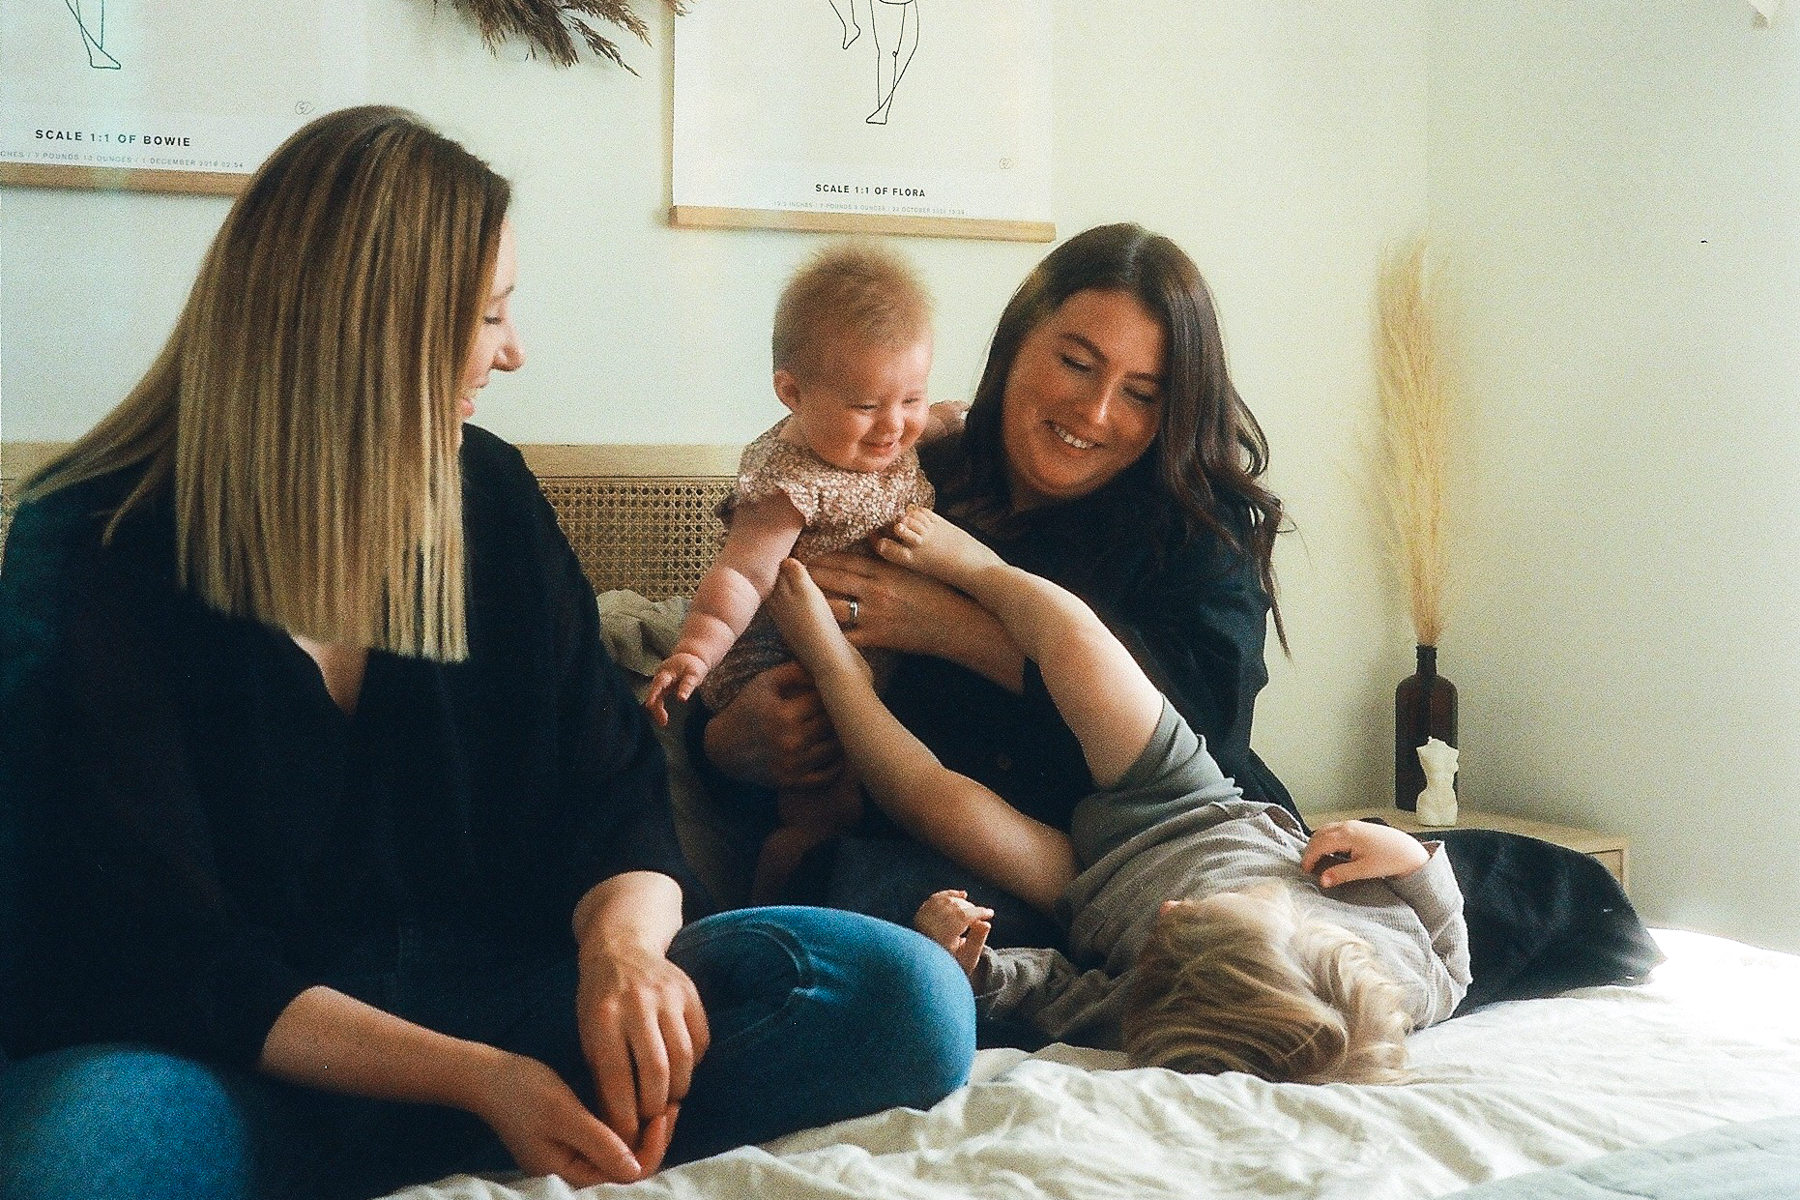 A photo of mums Lauren and Khiana with their two children; they are all sitting on a bed, Lauren is holding their youngest who is looking down and smiling at her older sibling who is laying on the bed with their feet up in the air